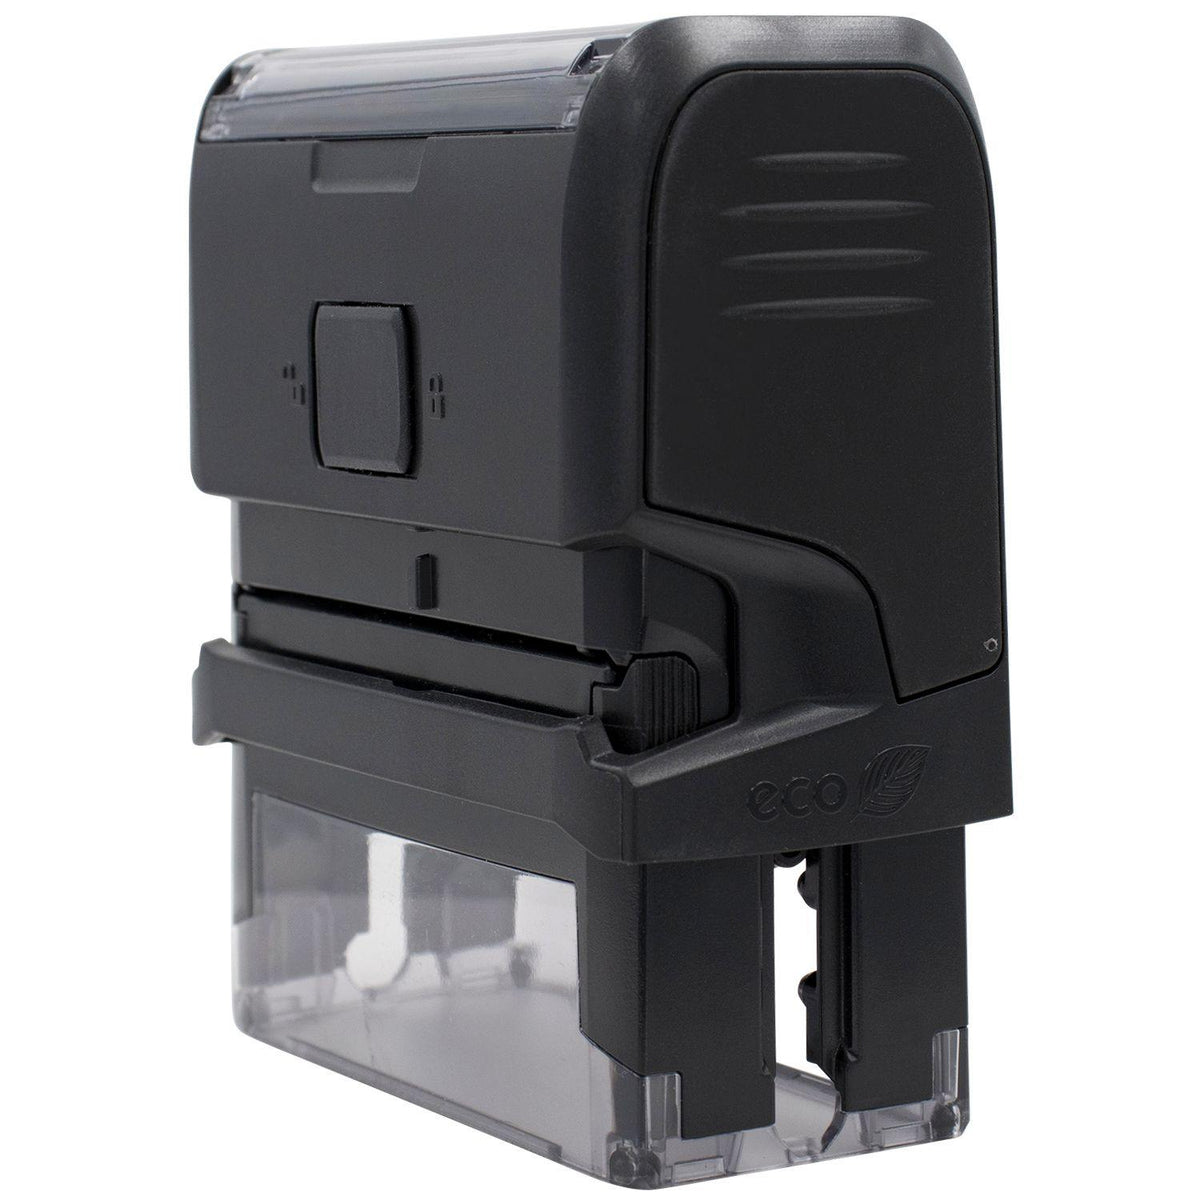 Side View of Large Self Inking Change Of Address Stamp at an Angle